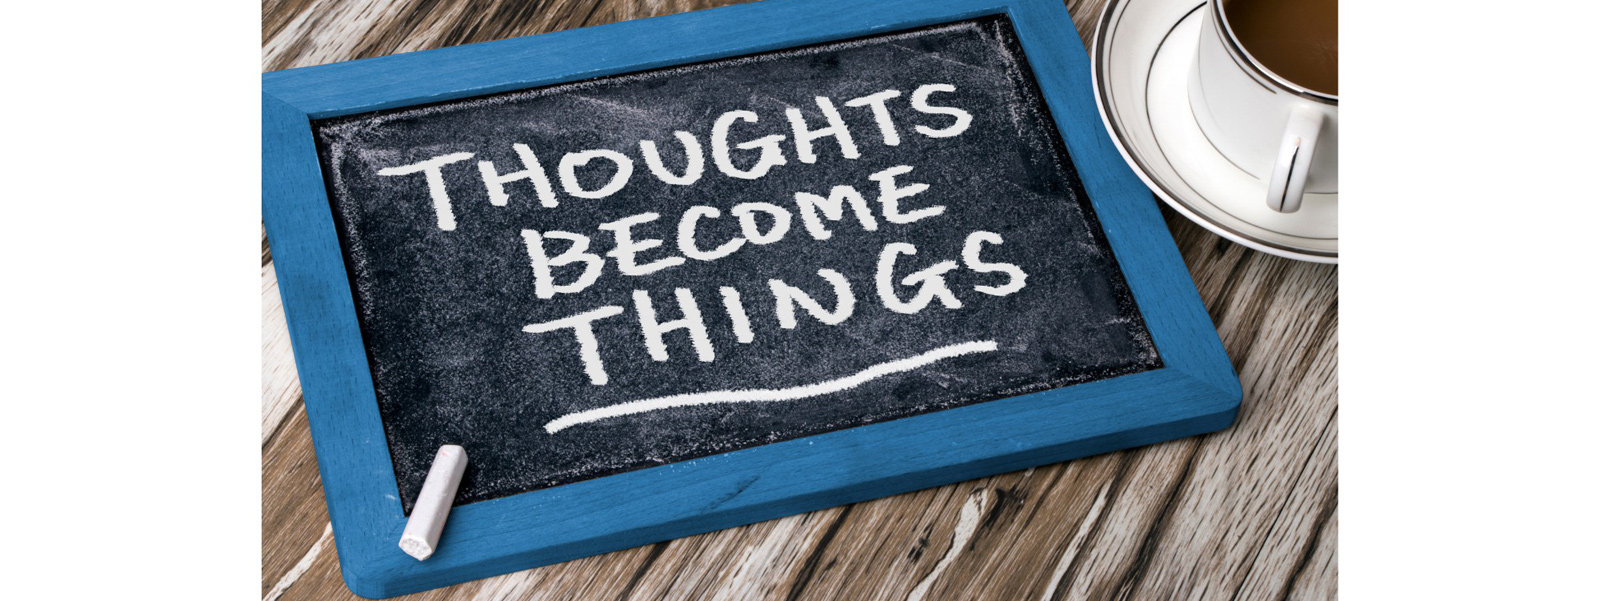 Thoughts Become Things